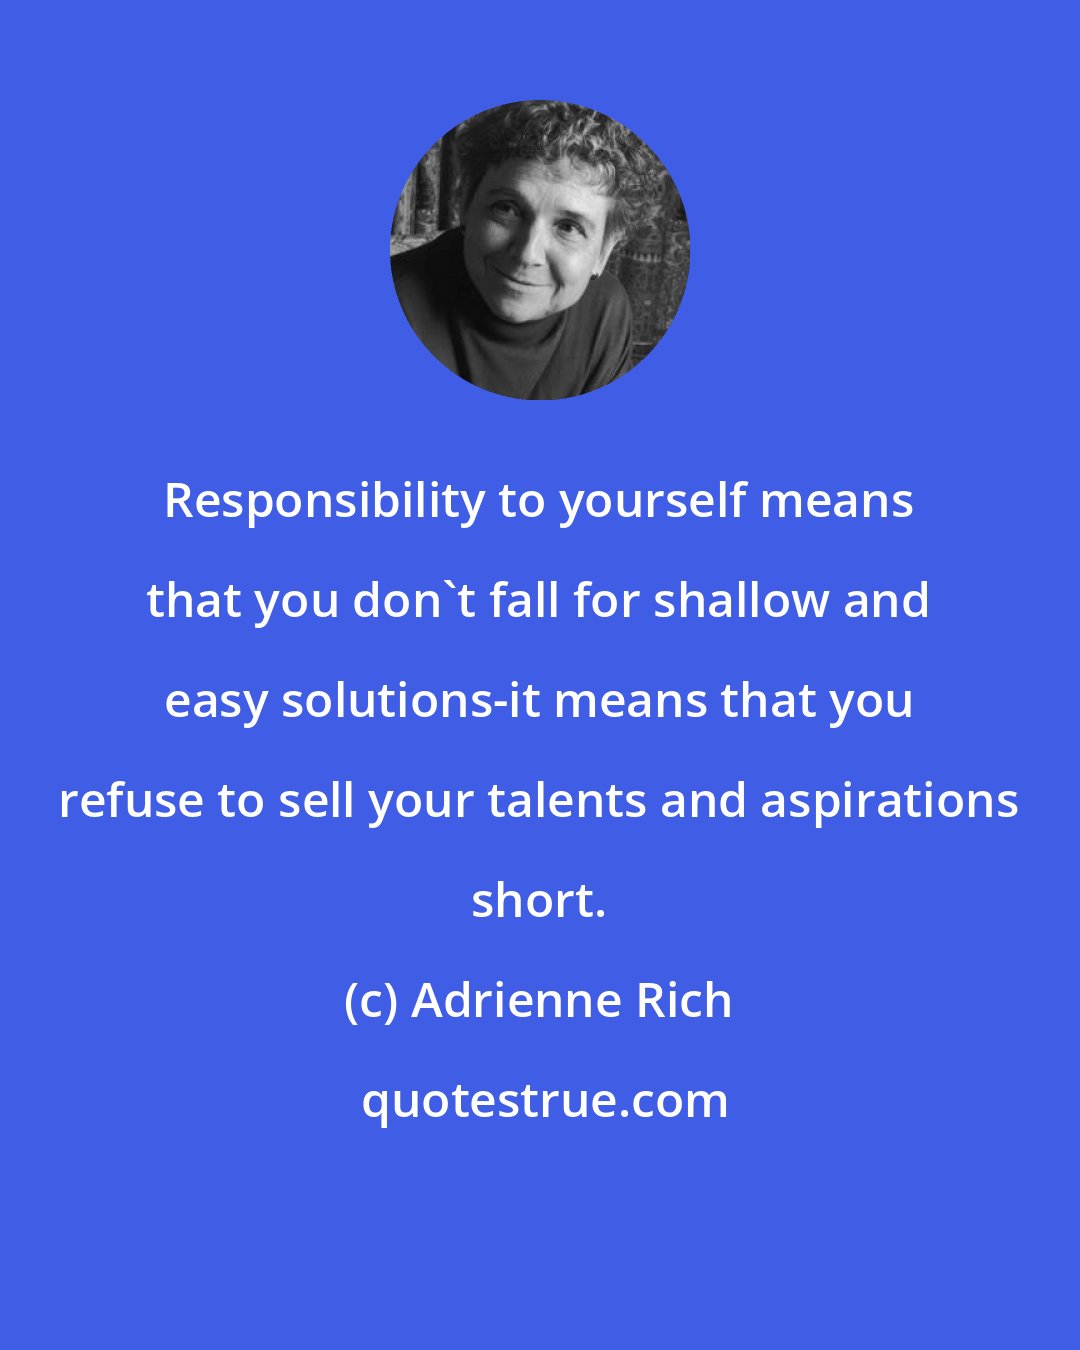 Adrienne Rich: Responsibility to yourself means that you don't fall for shallow and easy solutions-it means that you refuse to sell your talents and aspirations short.